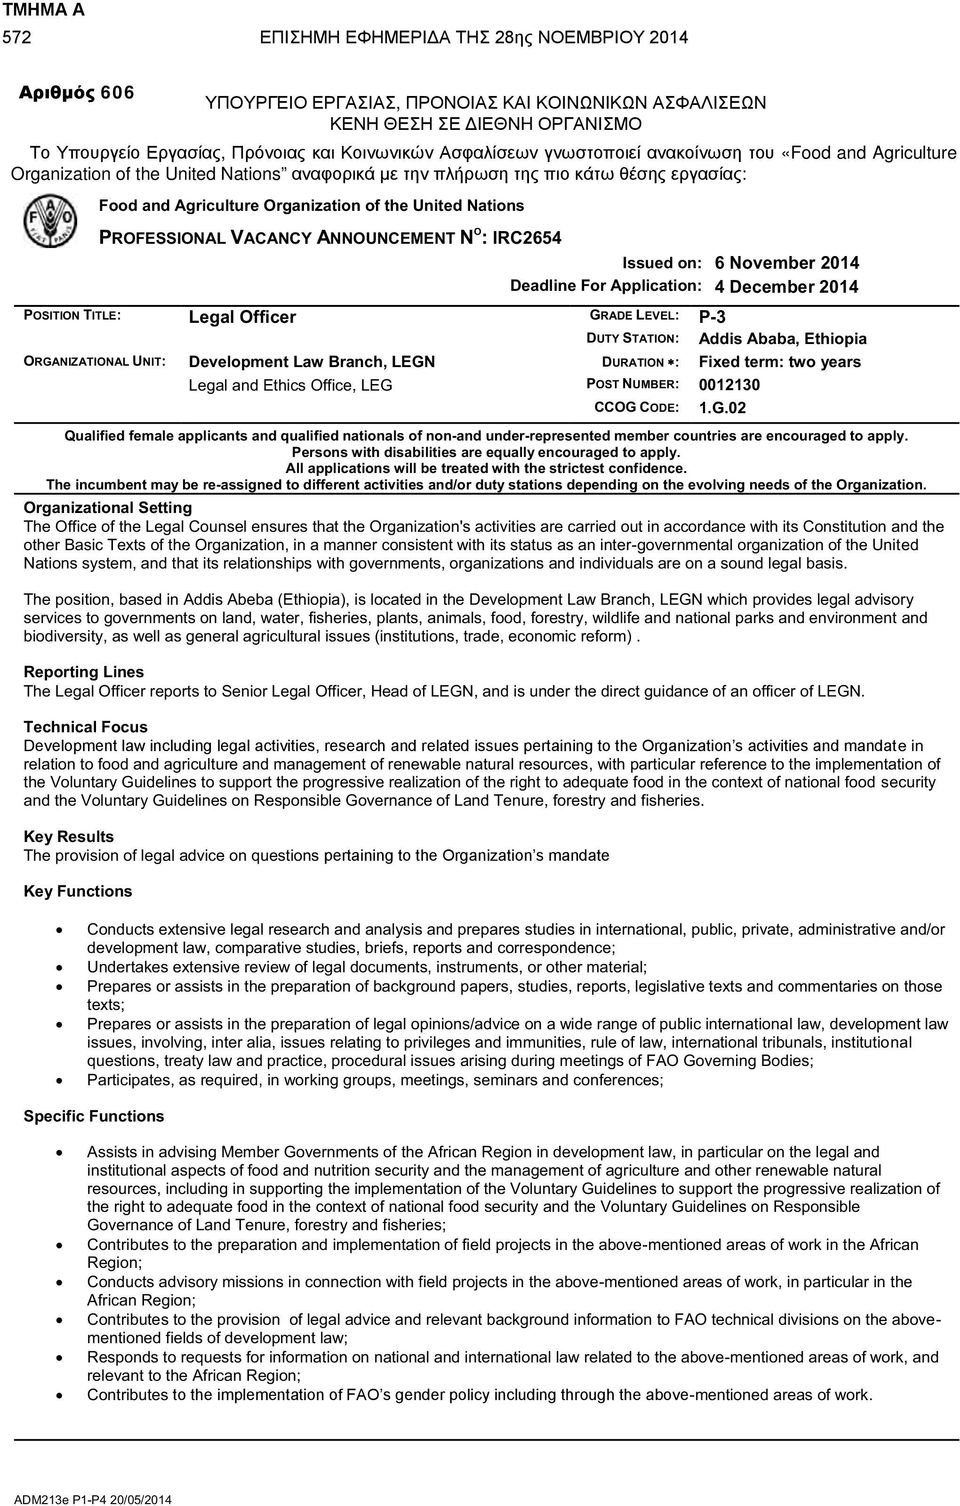 IRC2654 Issued on: 6 November 2014 Deadline For Application: 4 December 2014 POSITION TITLE: Legal Officer GRADE LEVEL: P-3 DUTY STATION: Addis Ababa, Ethiopia ORGANIZATIONAL UNIT: Development Law